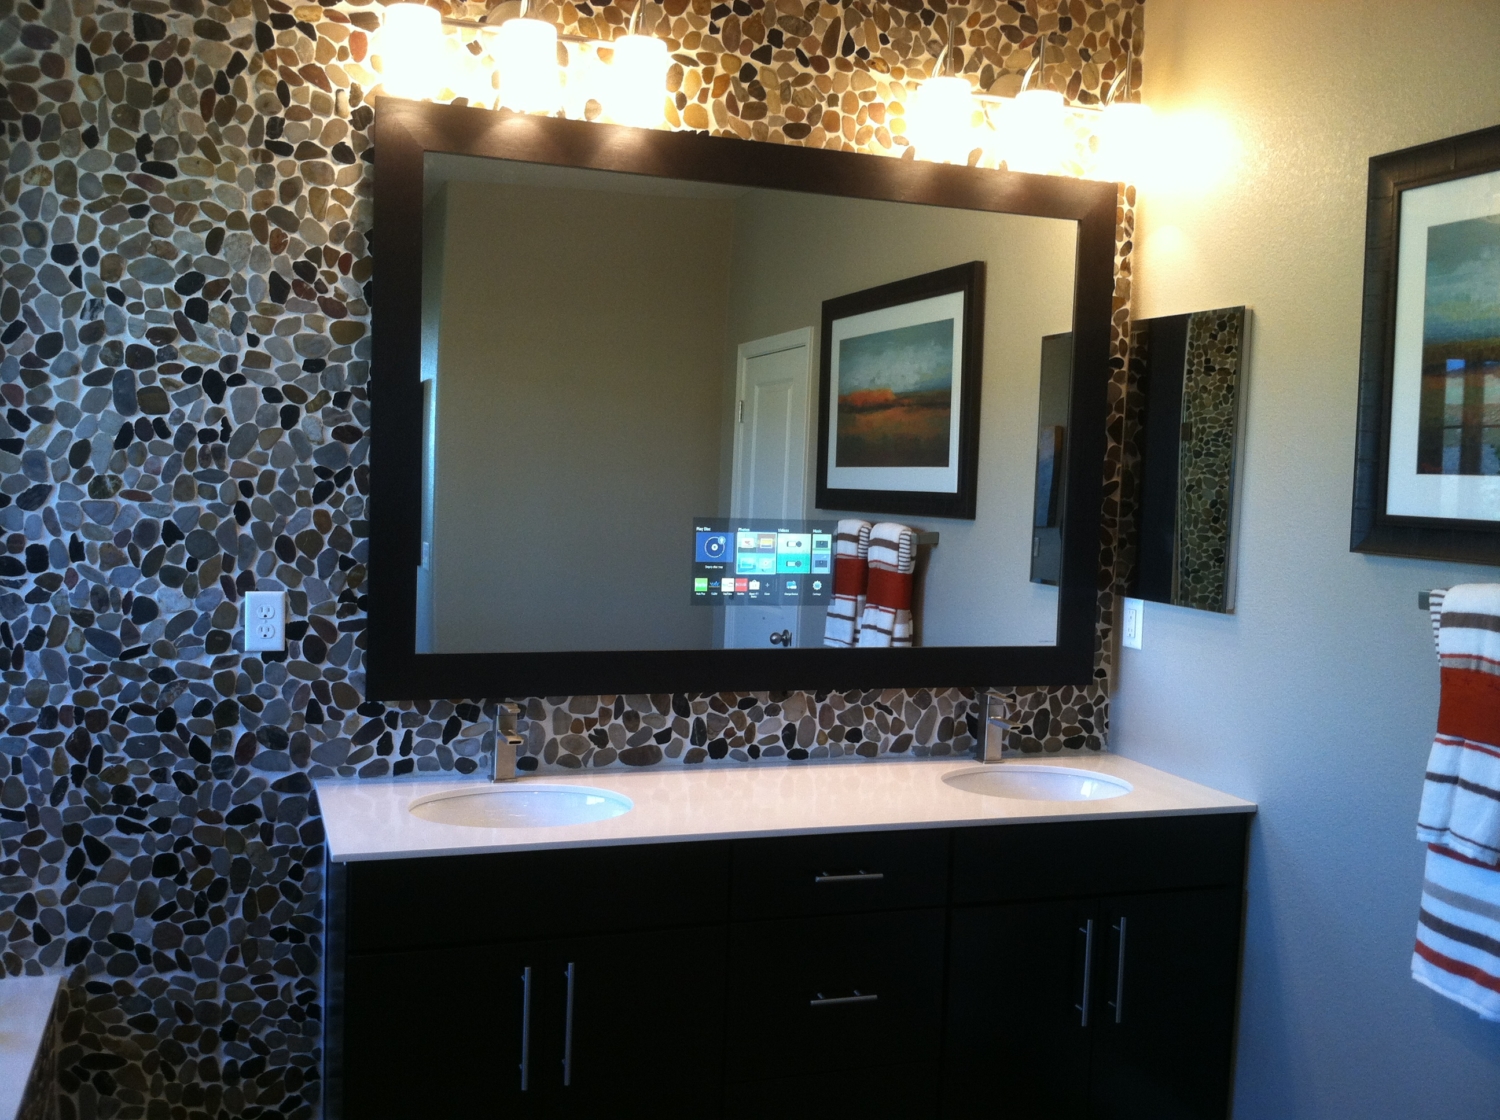 Bathroom mirror with built in Control4 navigation panel